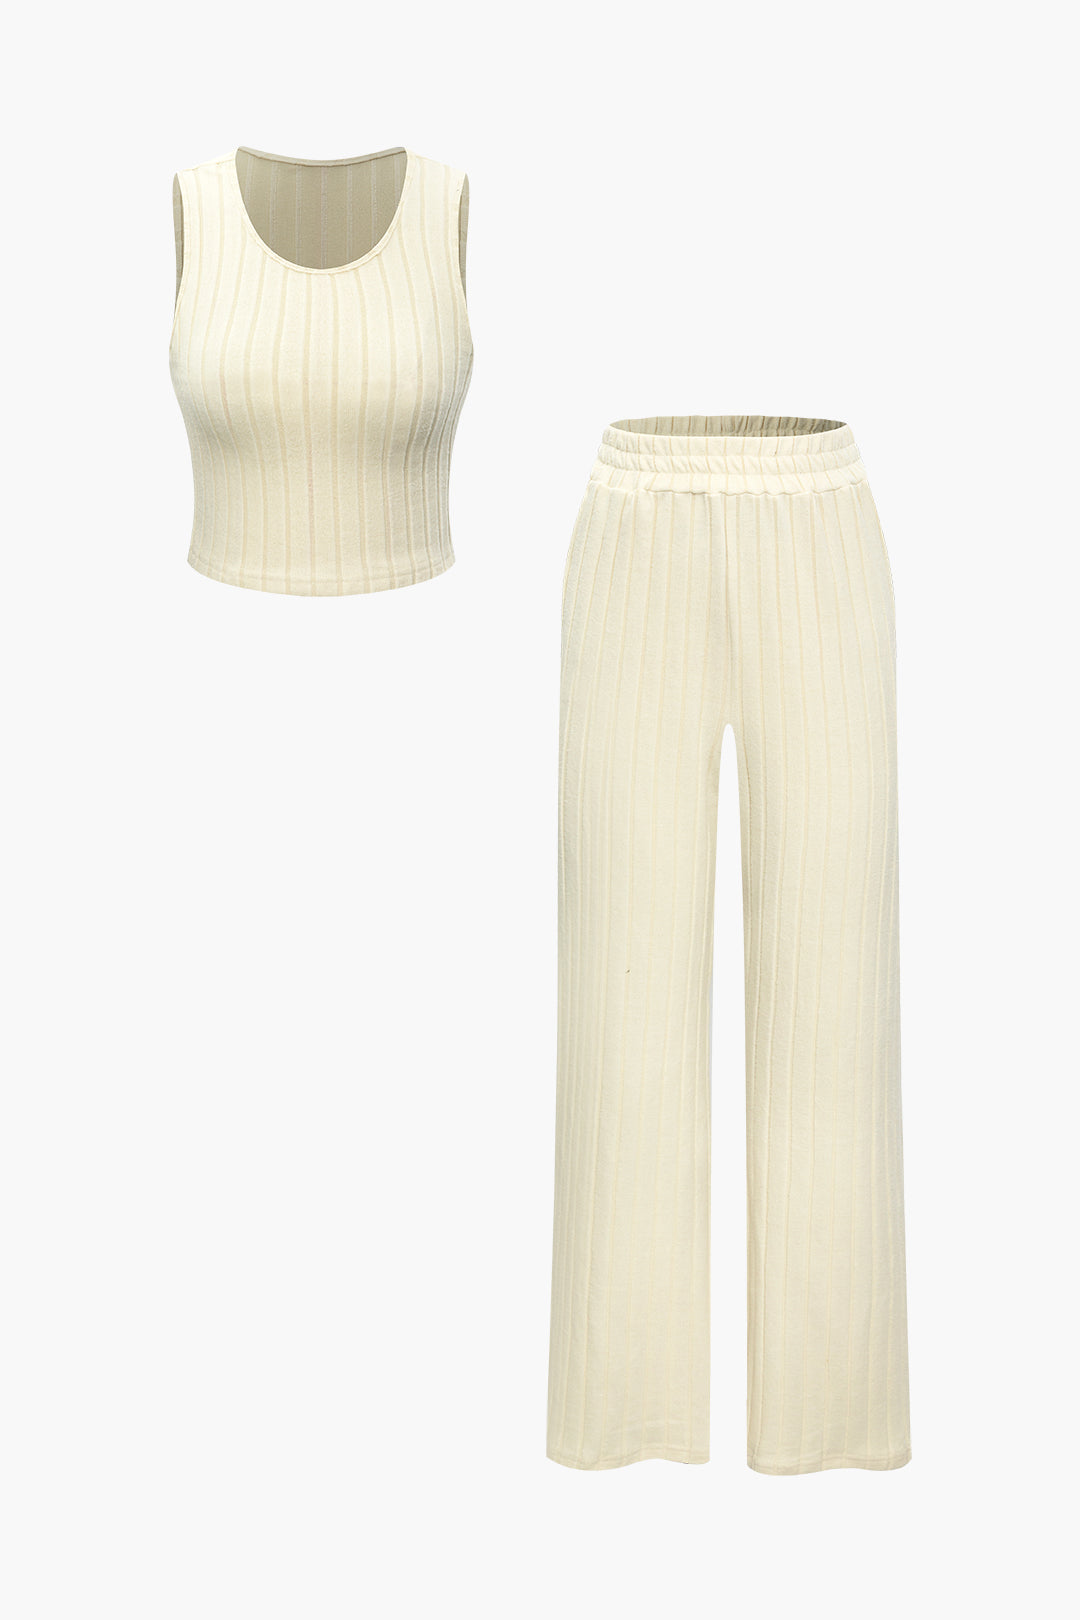 Basic Solid Knit Tank Top And High Waist Pants Set